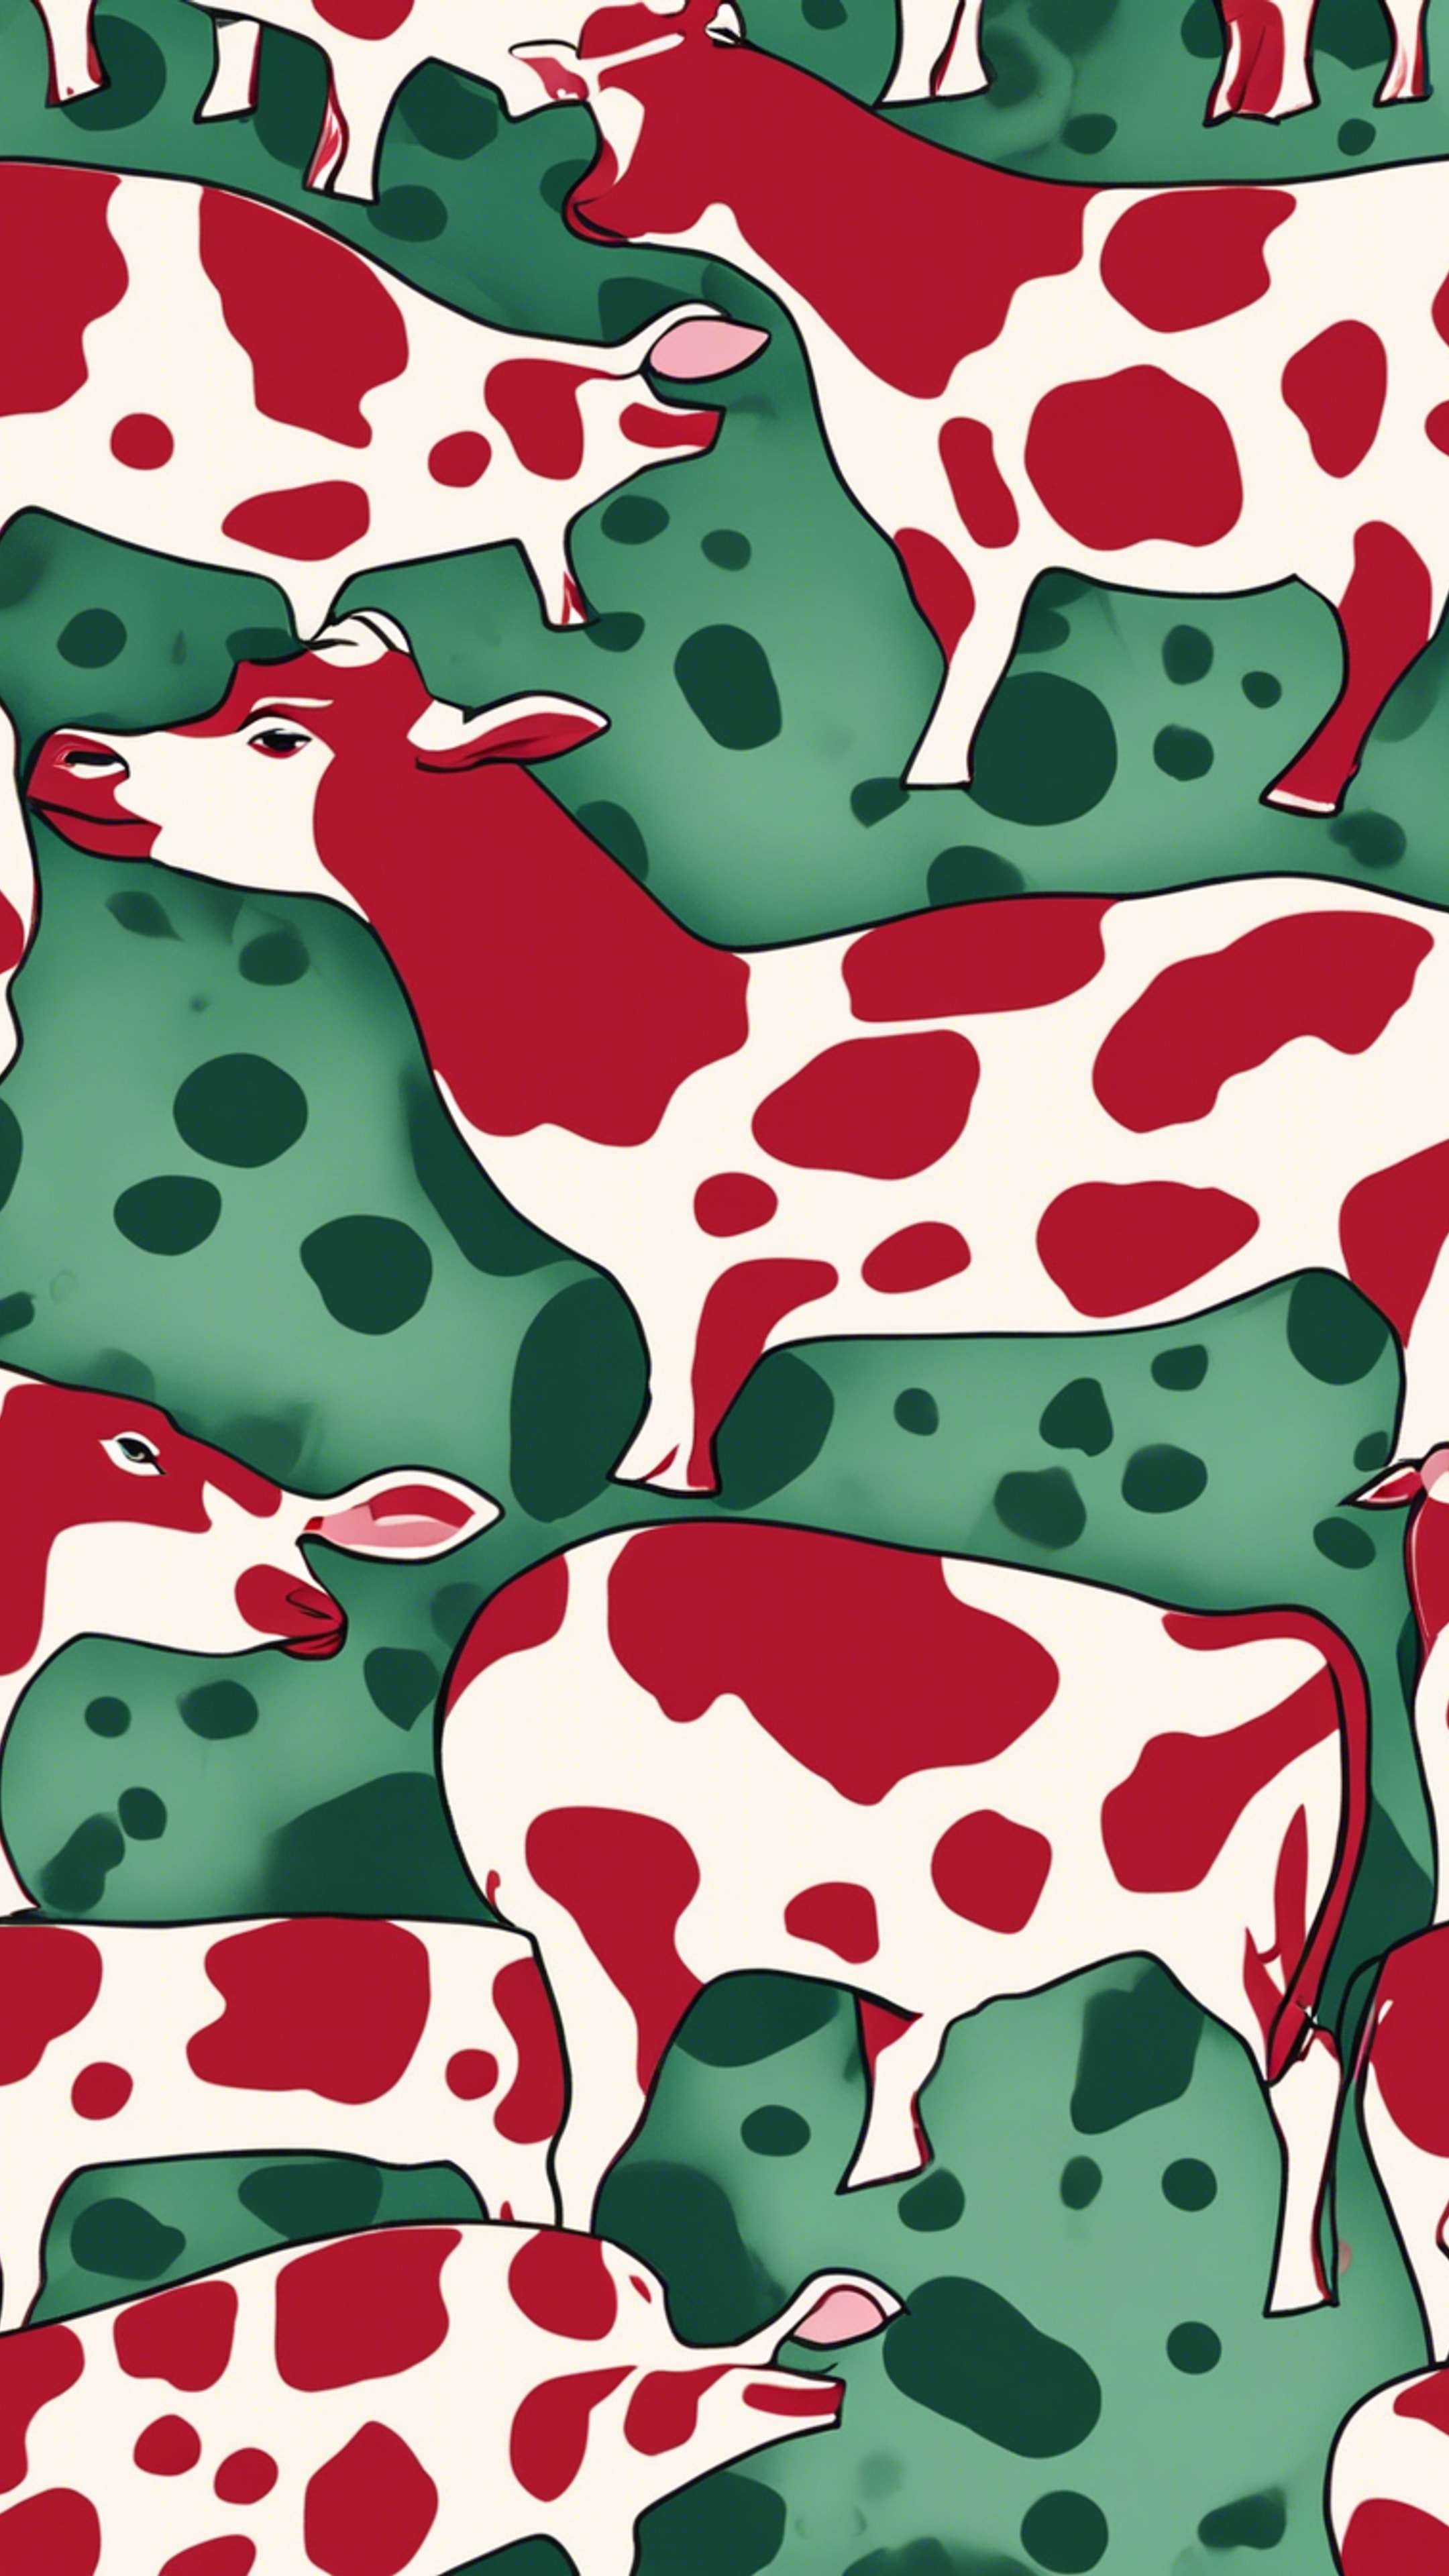 A dynamic, textured pattern of red and green cow spots. Tapet[159333102a774de6a0e2]